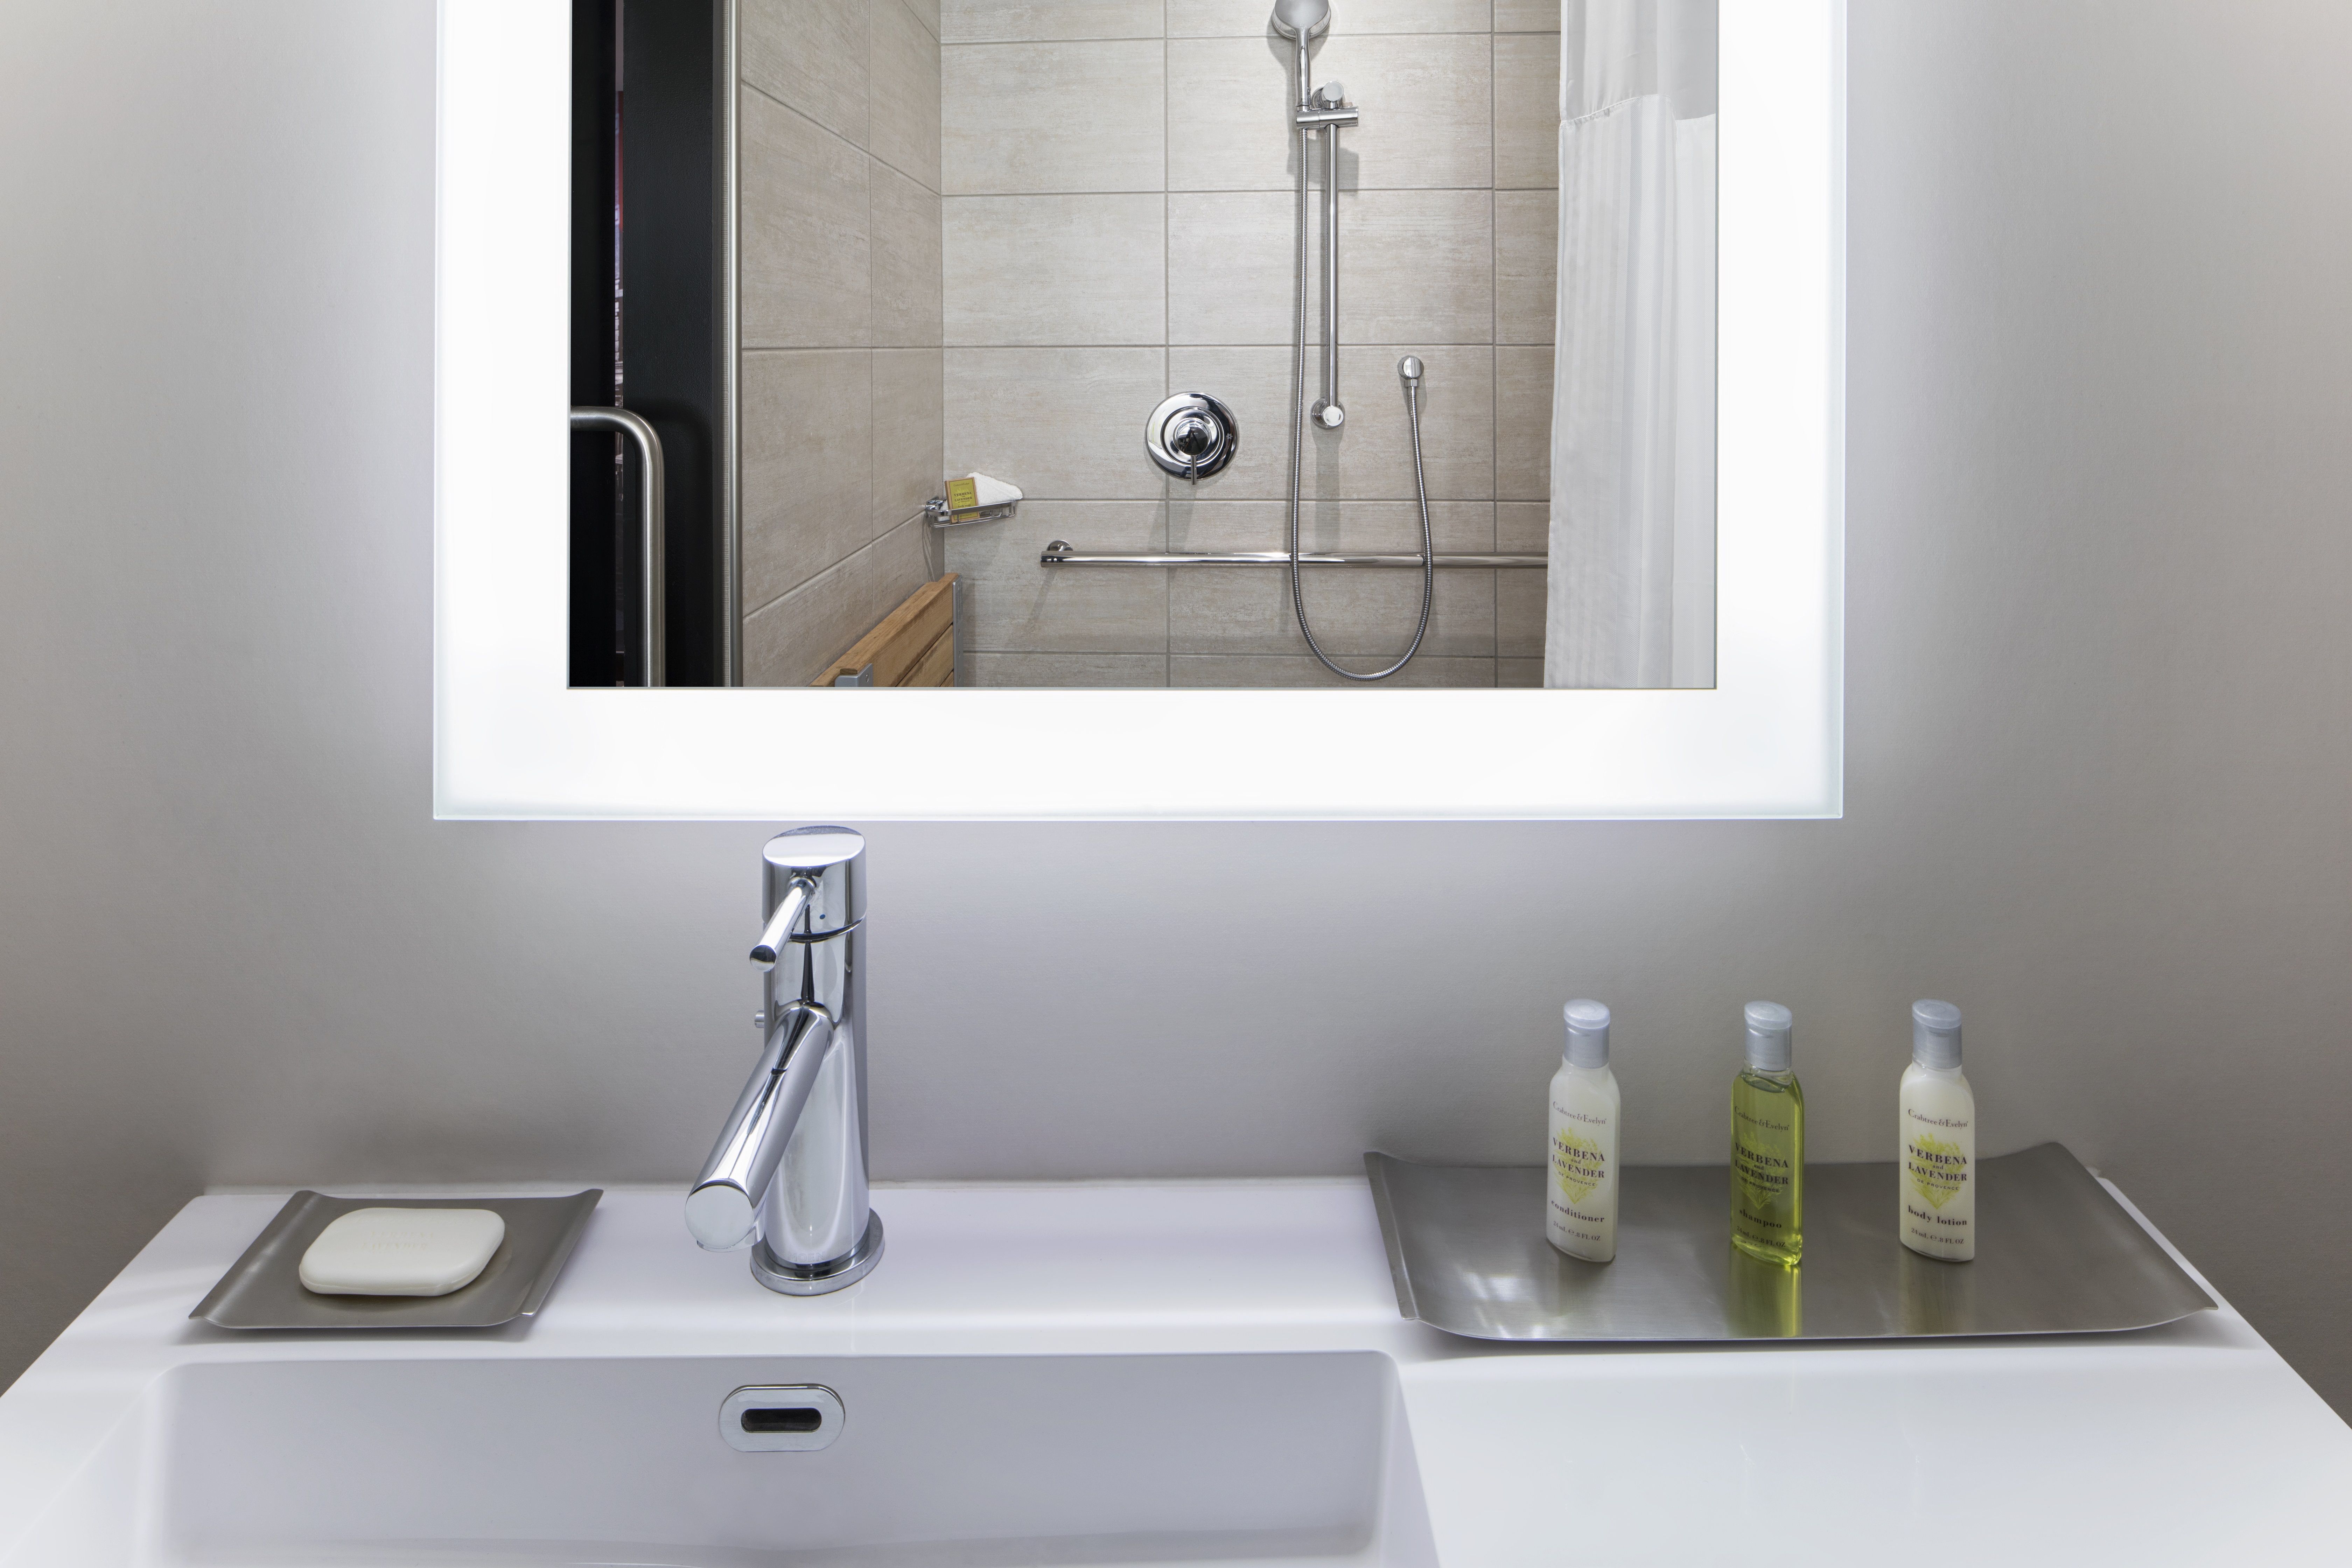 Shower With Seat, Grab Bars and Handheld Showerhead Reflected in Brightly Lit Vanity Mirror, Sink, and Toiletries in Accessible Bathroom